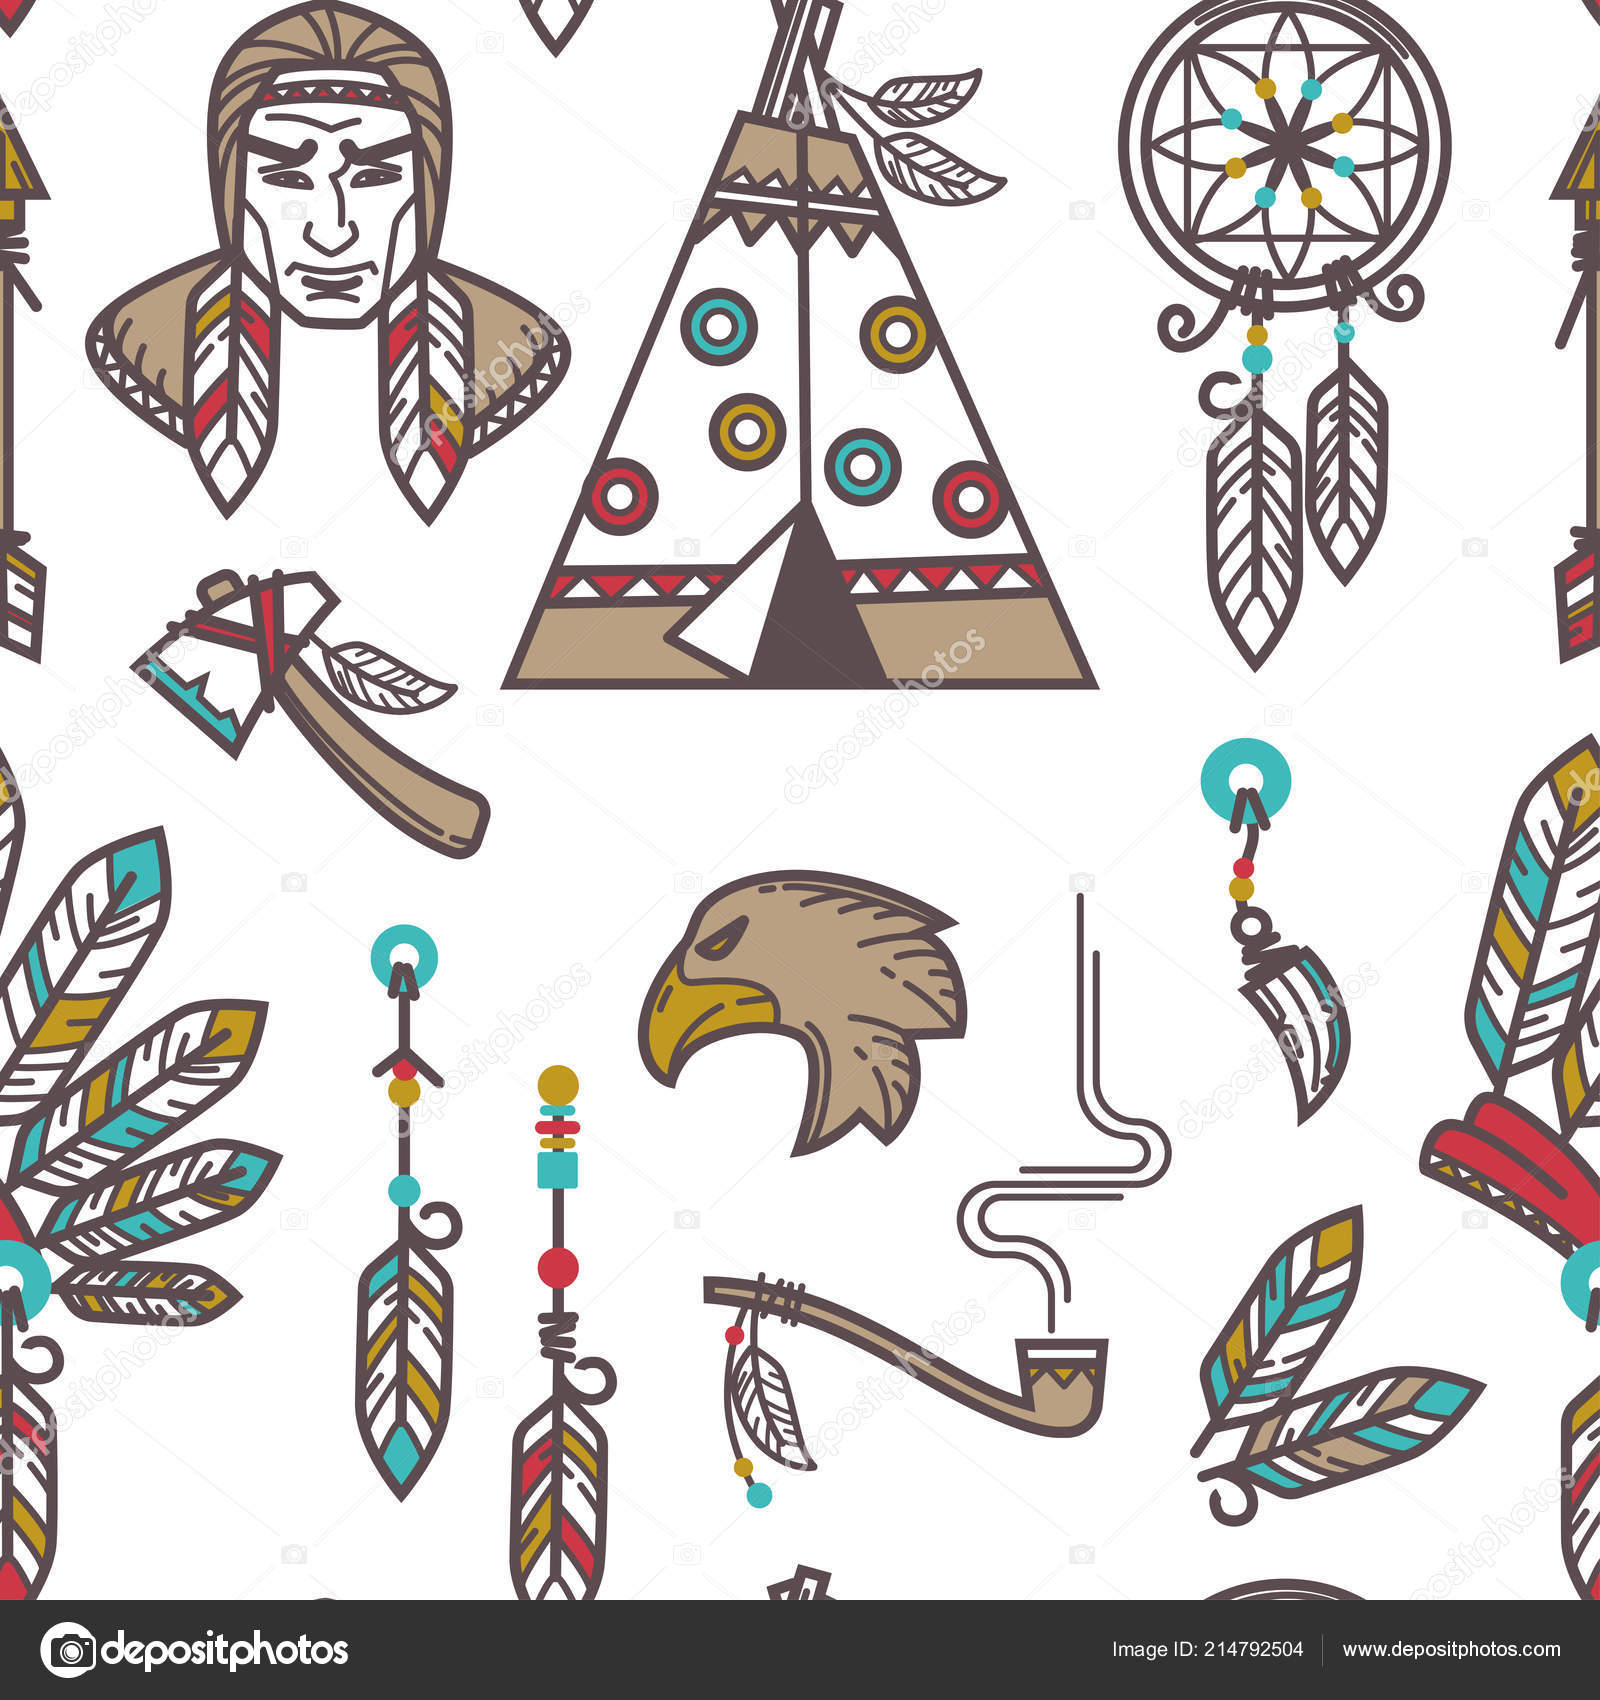 Native American Indians Traditional Culture Symbols Vector Icons.